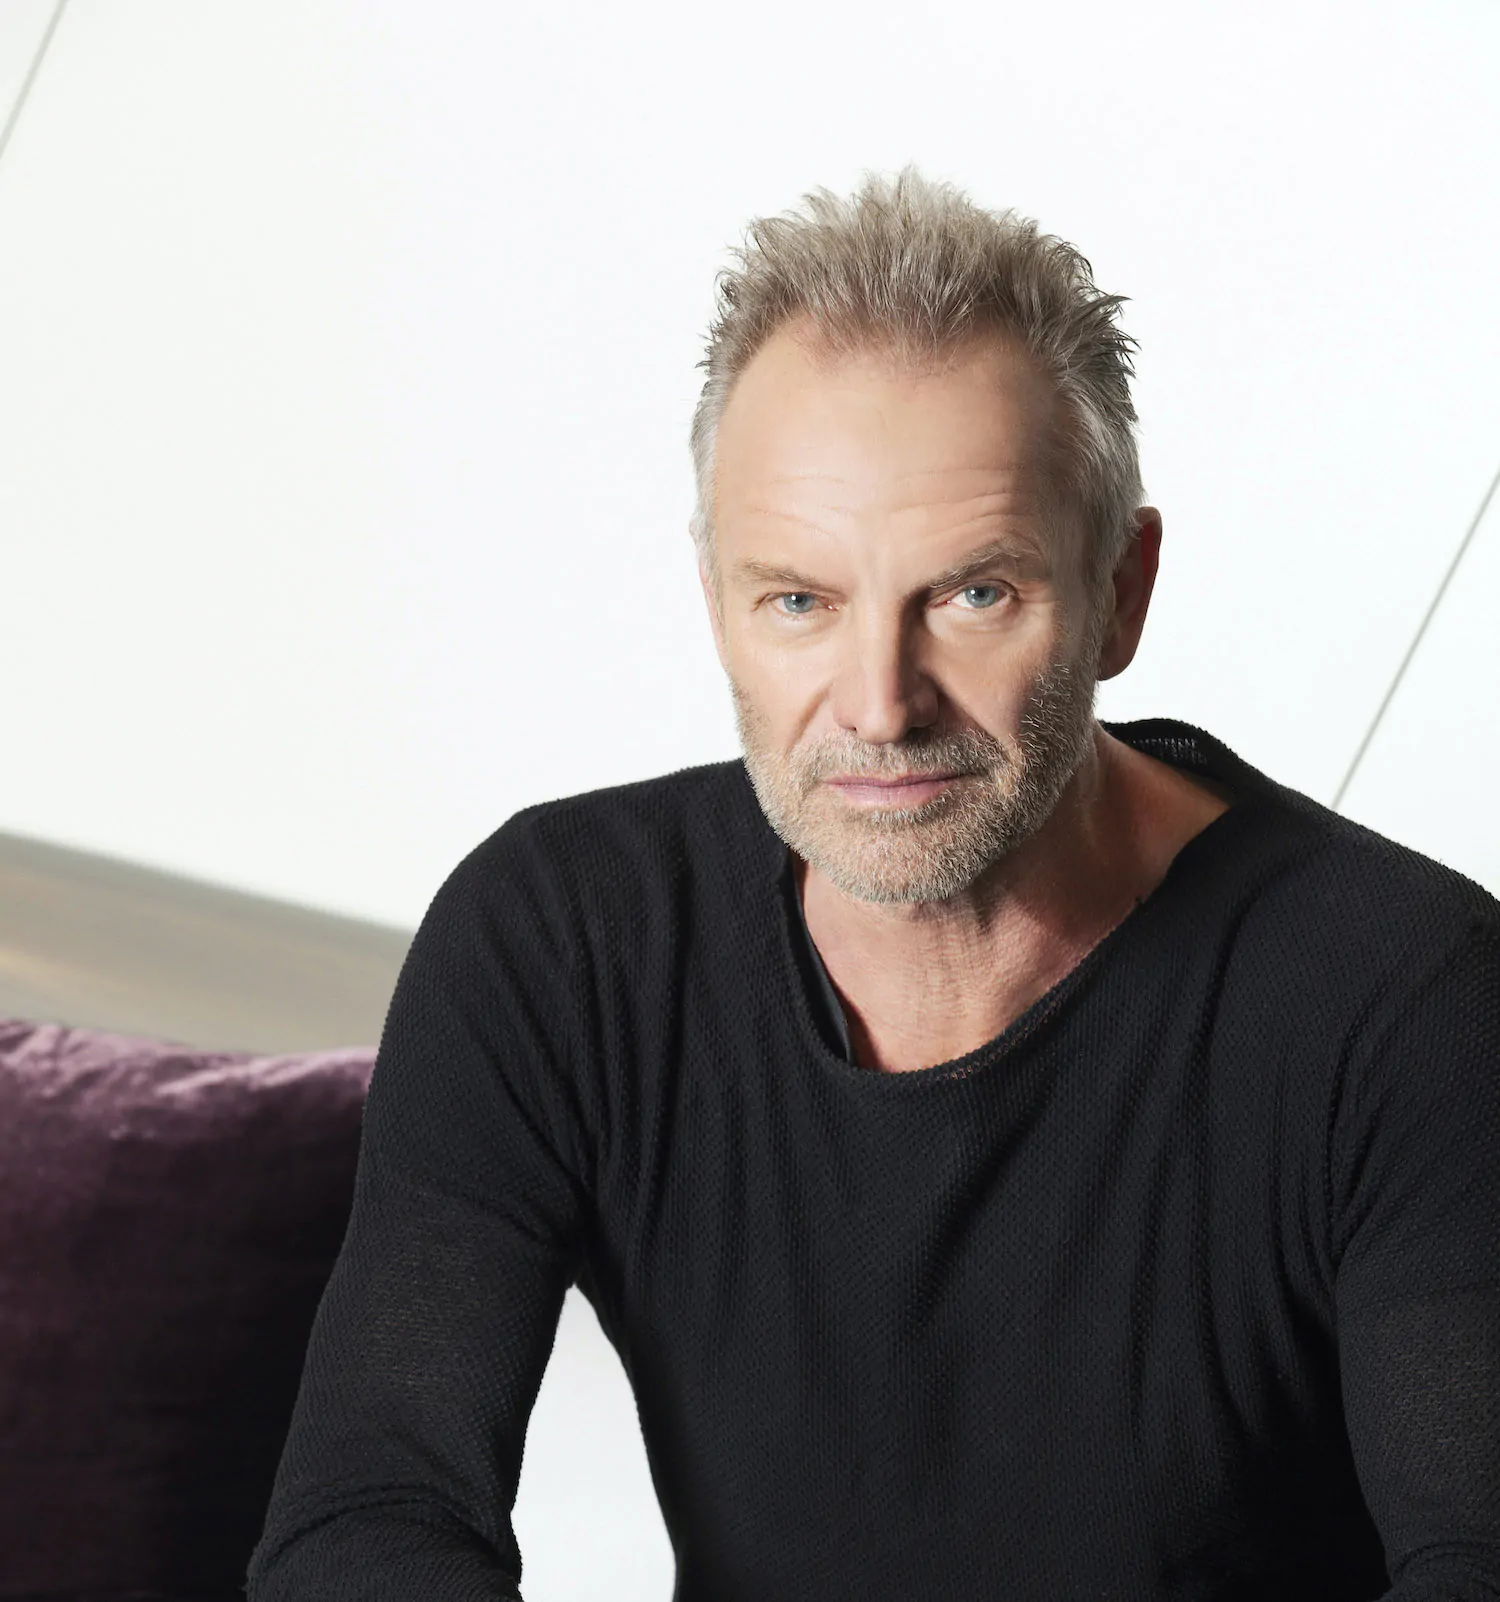 STING to release new album ‘Duets’ on November 27th